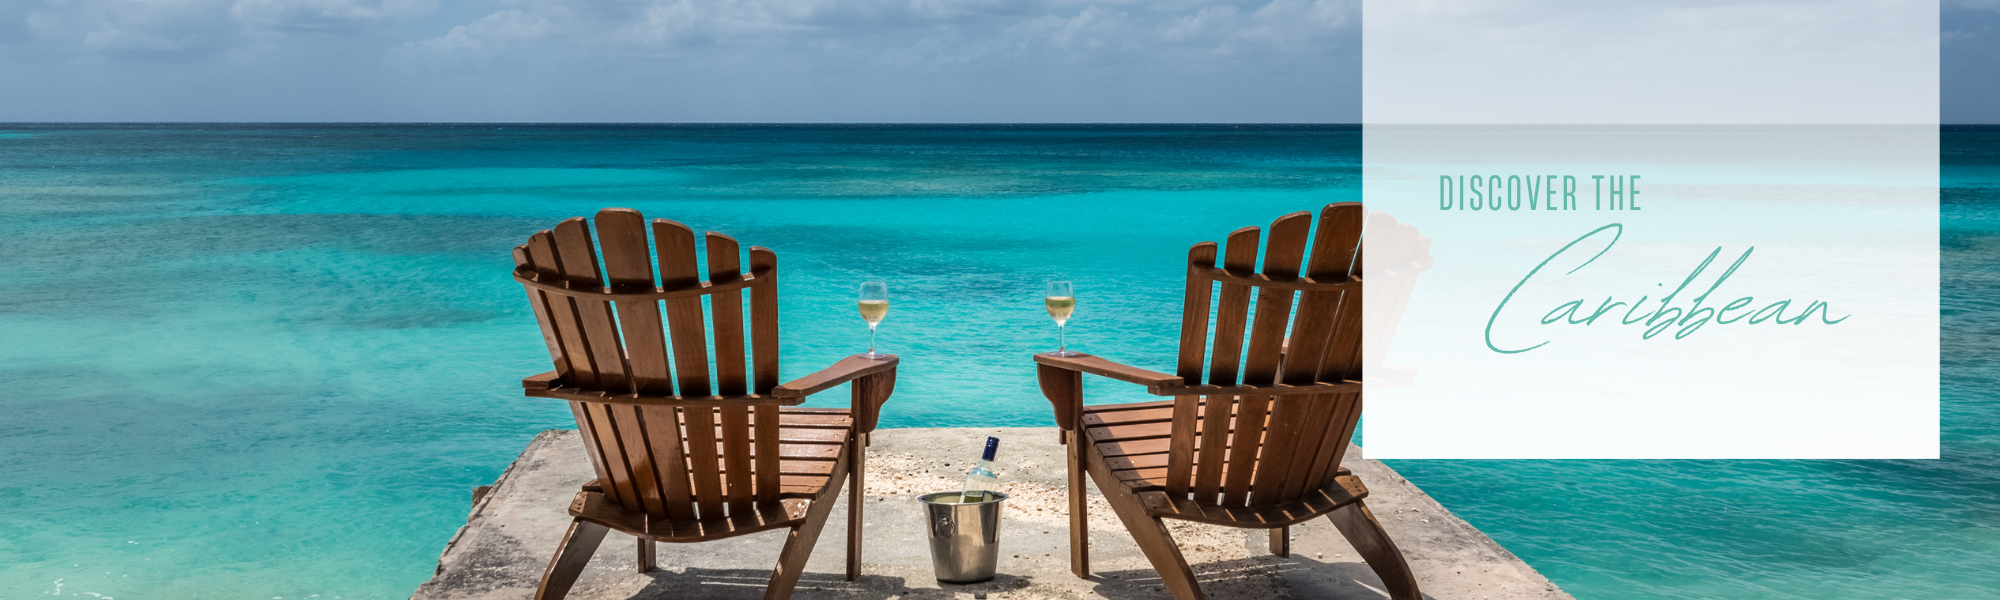 Adirondack chairs with glasses of wine overlooking turquoise Caribbean water 